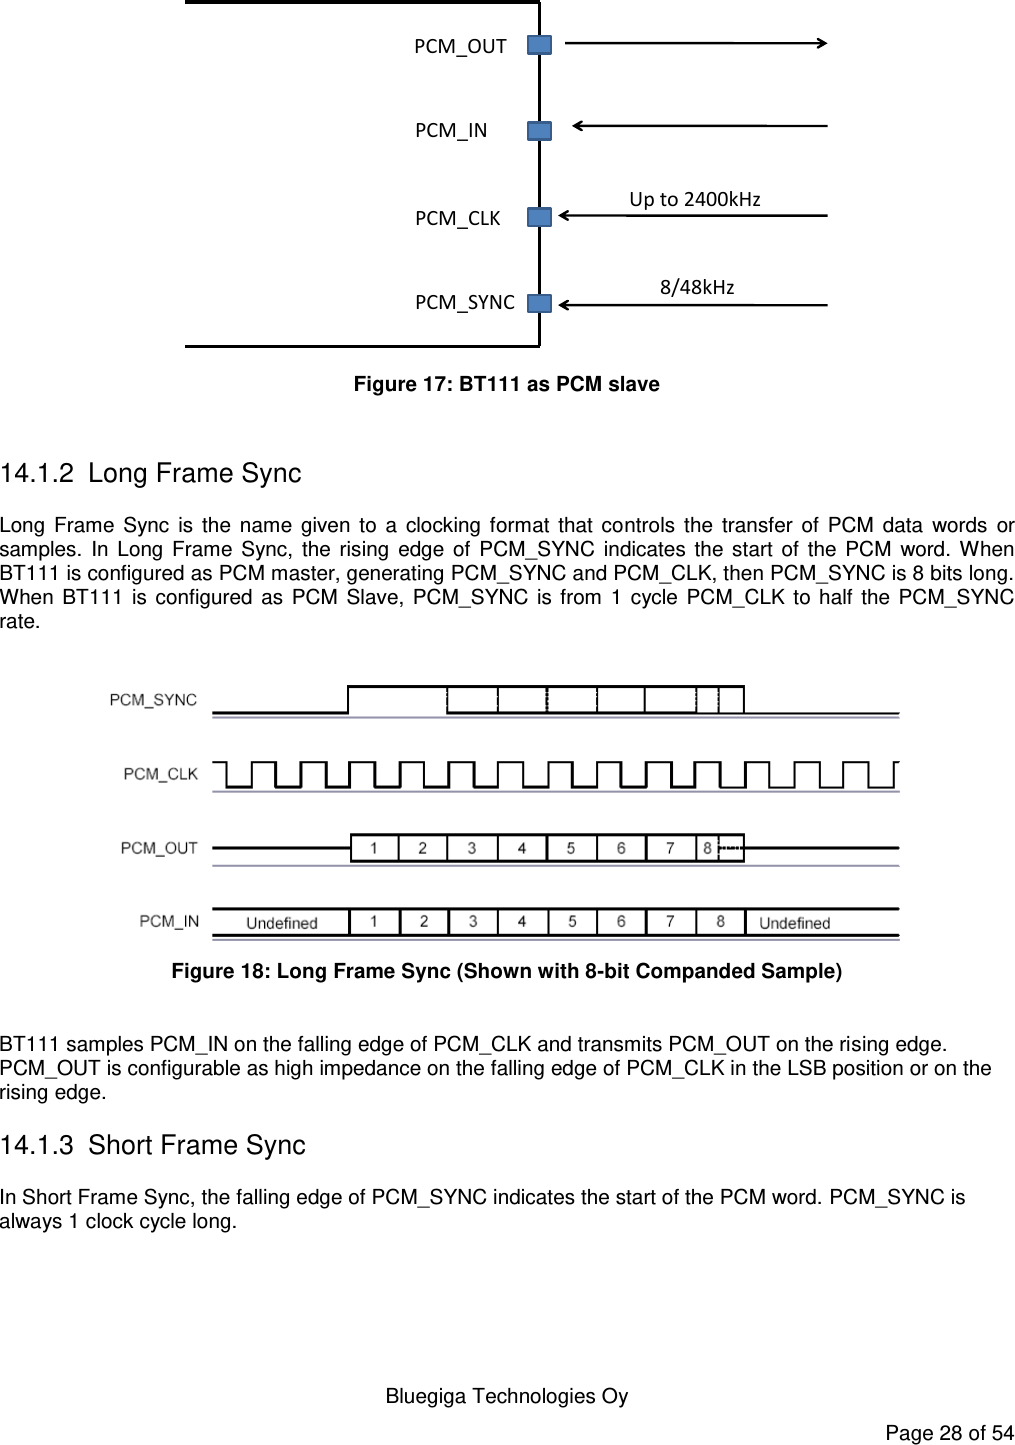    Bluegiga Technologies Oy Page 28 of 54 PCM_OUTPCM_INPCM_CLKPCM_SYNCUp to 2400kHz8/48kHz Figure 17: BT111 as PCM slave  14.1.2  Long Frame Sync Long  Frame  Sync  is  the  name  given  to  a  clocking  format  that  controls  the  transfer  of  PCM  data  words  or samples.  In  Long  Frame  Sync,  the  rising  edge  of  PCM_SYNC  indicates  the  start  of  the  PCM  word.  When BT111 is configured as PCM master, generating PCM_SYNC and PCM_CLK, then PCM_SYNC is 8 bits long. When  BT111 is  configured  as  PCM  Slave,  PCM_SYNC  is  from  1  cycle  PCM_CLK  to  half  the  PCM_SYNC rate.   Figure 18: Long Frame Sync (Shown with 8-bit Companded Sample)  BT111 samples PCM_IN on the falling edge of PCM_CLK and transmits PCM_OUT on the rising edge. PCM_OUT is configurable as high impedance on the falling edge of PCM_CLK in the LSB position or on the rising edge. 14.1.3 Short Frame Sync In Short Frame Sync, the falling edge of PCM_SYNC indicates the start of the PCM word. PCM_SYNC is always 1 clock cycle long.  